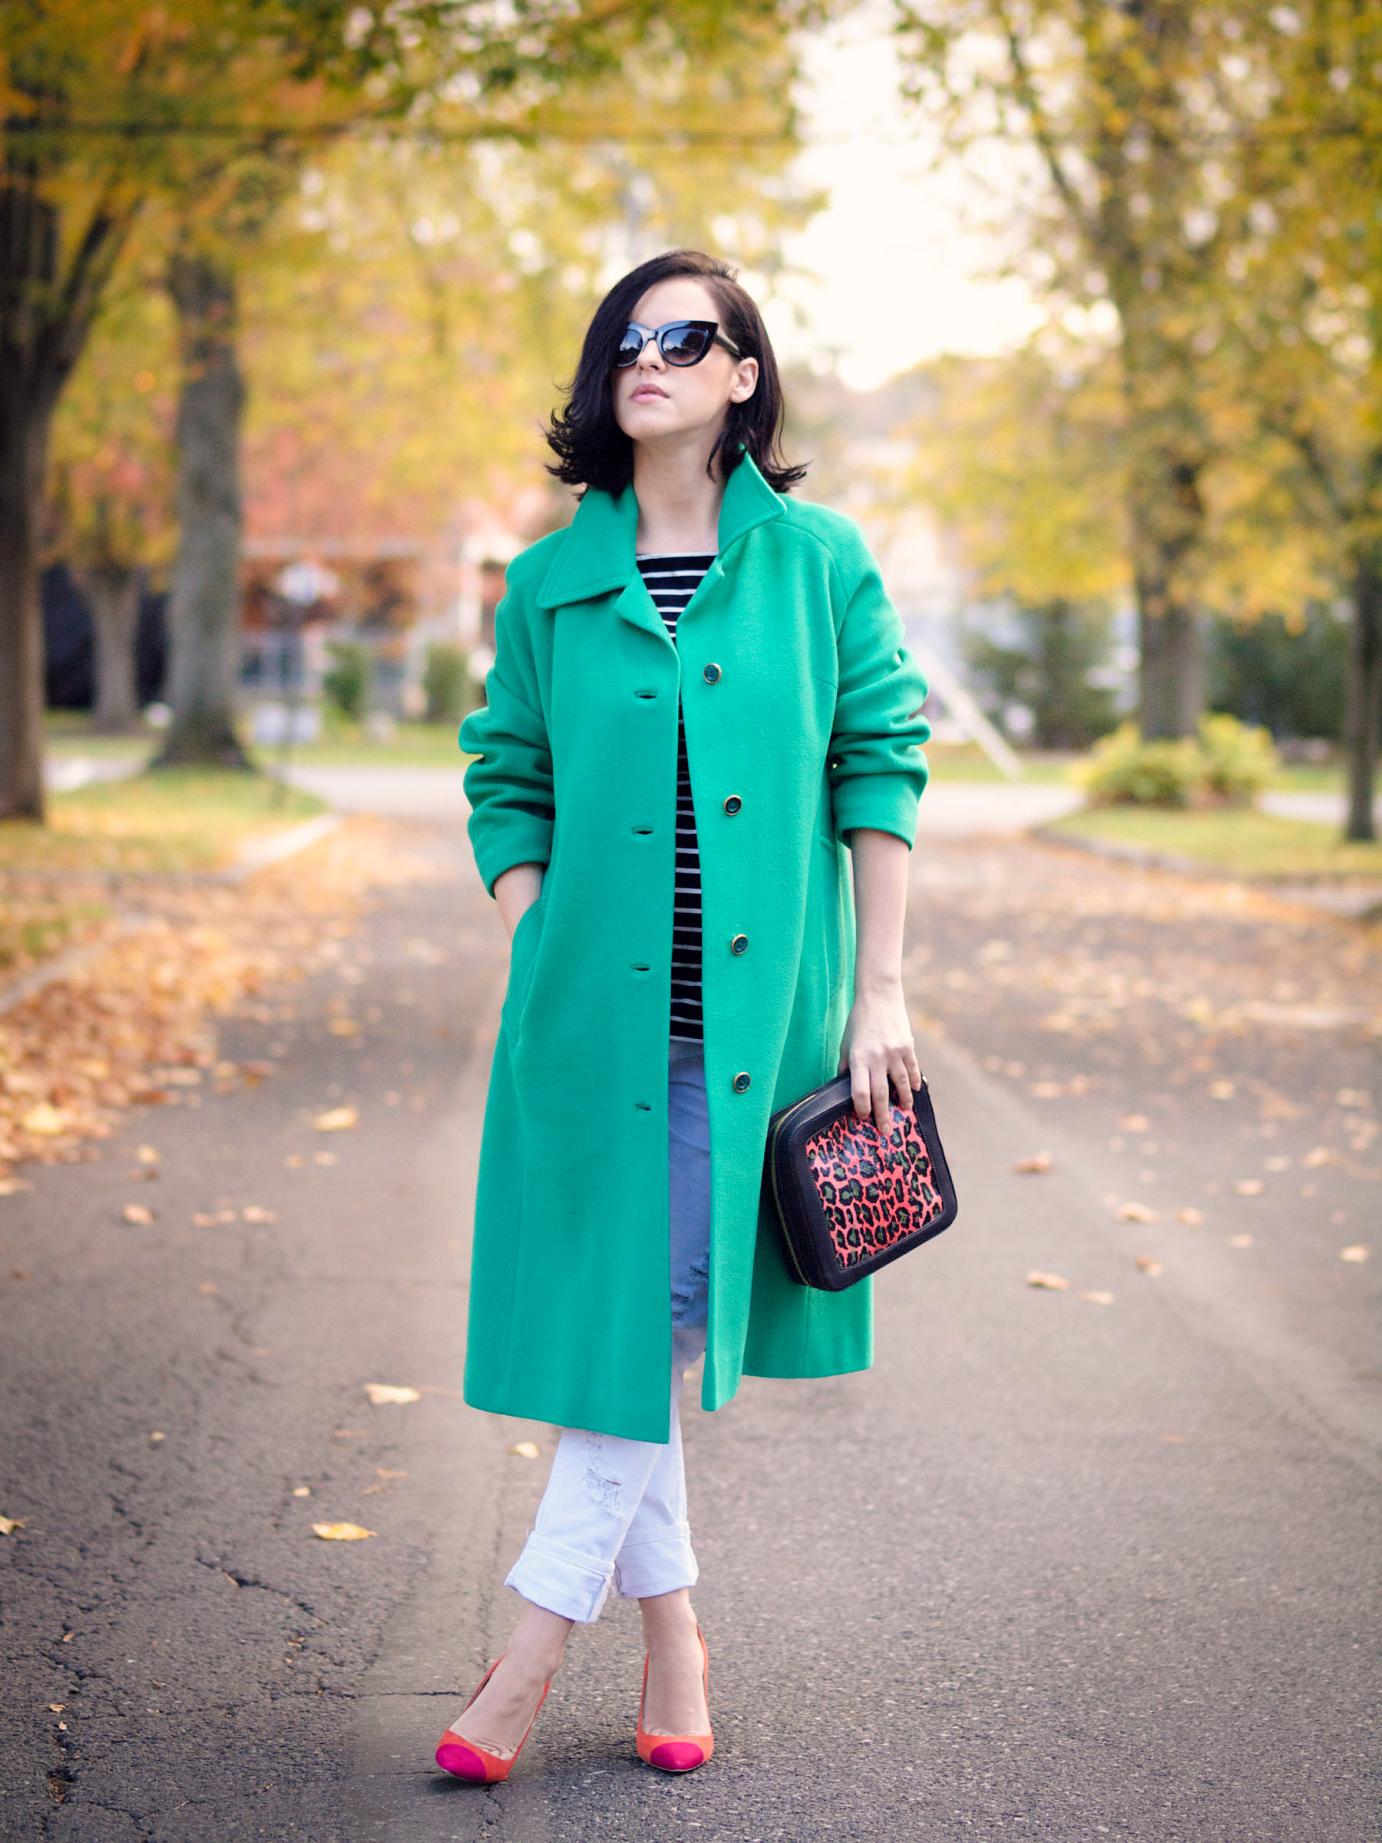 bittersweet colours, street style, fall coats, fall colors, fall trends, fall street style, Manolo Blahnik shoes, meredith wendell, stripes, boyfriend jeans, eye cat sunglasses, maternity style, bump style, 21 weeks, 